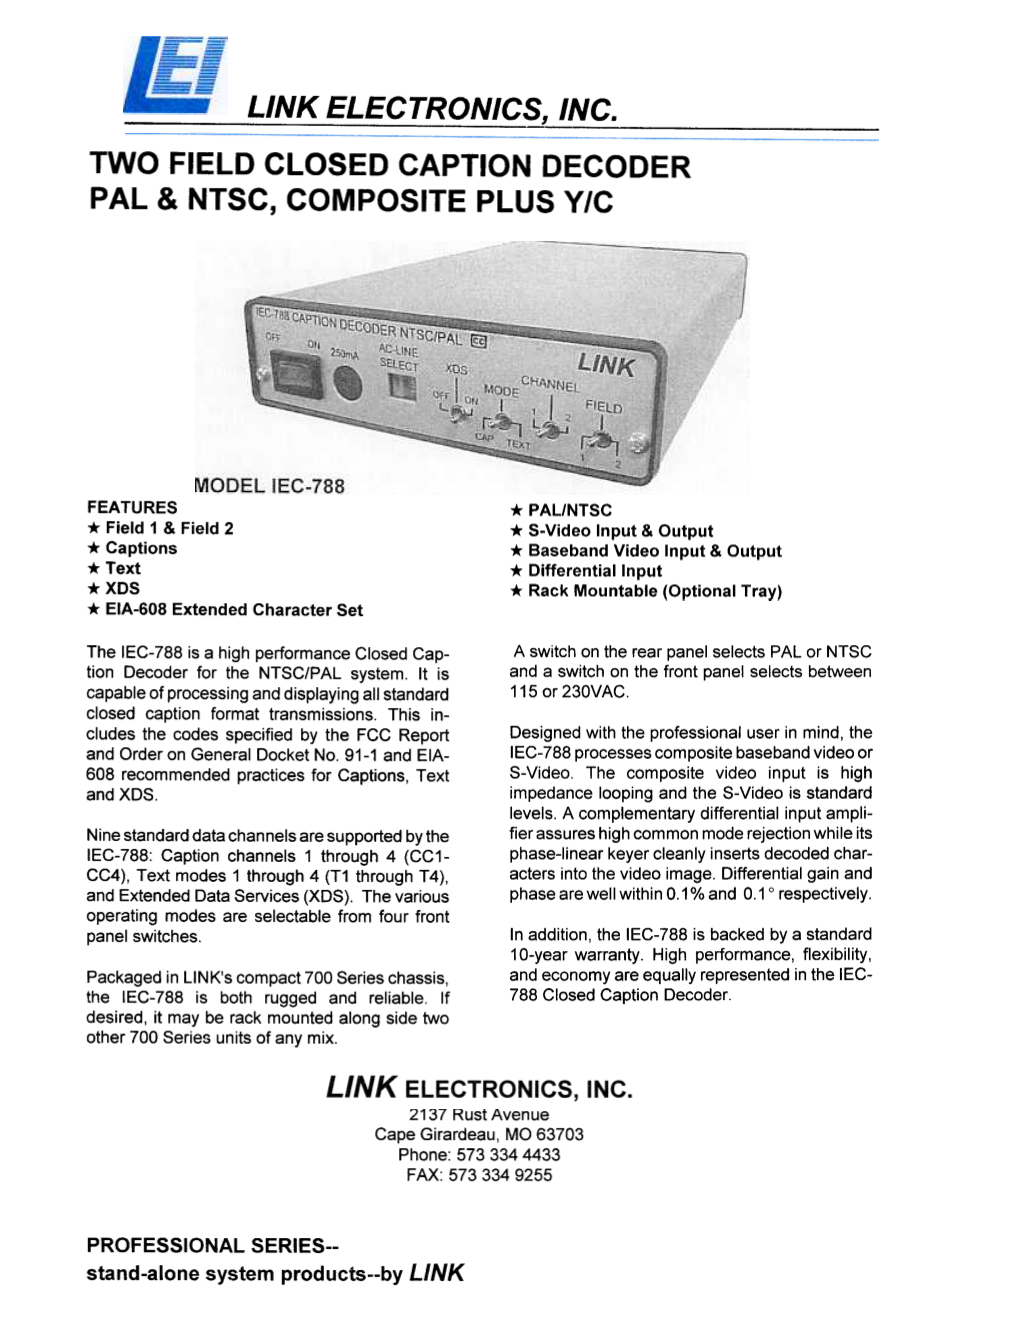 Two Field Closed Caption Decoder Pal & Ntsc